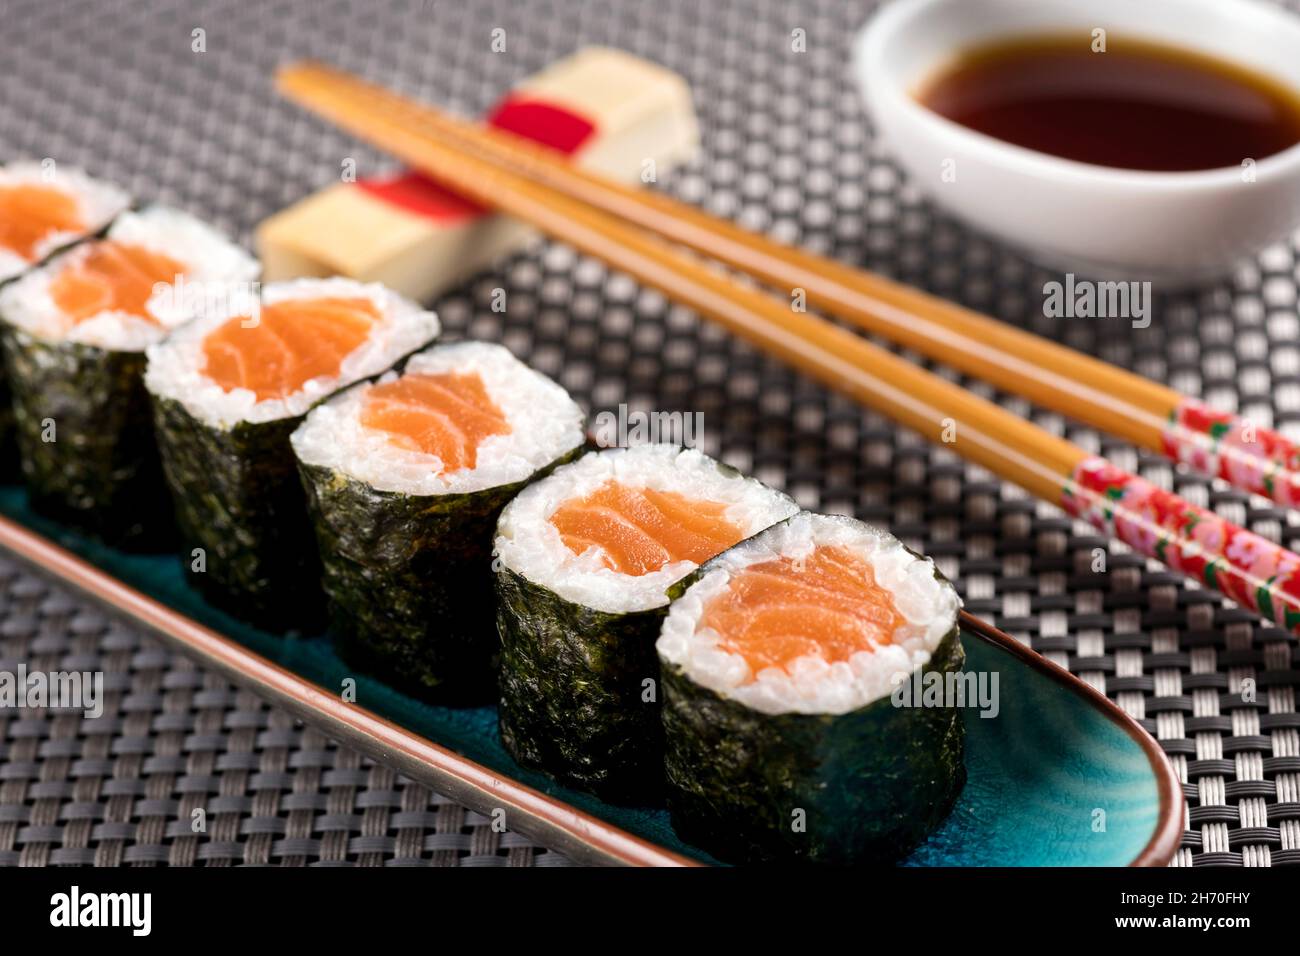 Salmon Hosomaki sushi served in restaurant, with chopsticks and soy sauce, viewed in close-up on wickered bamboo mat Stock Photo